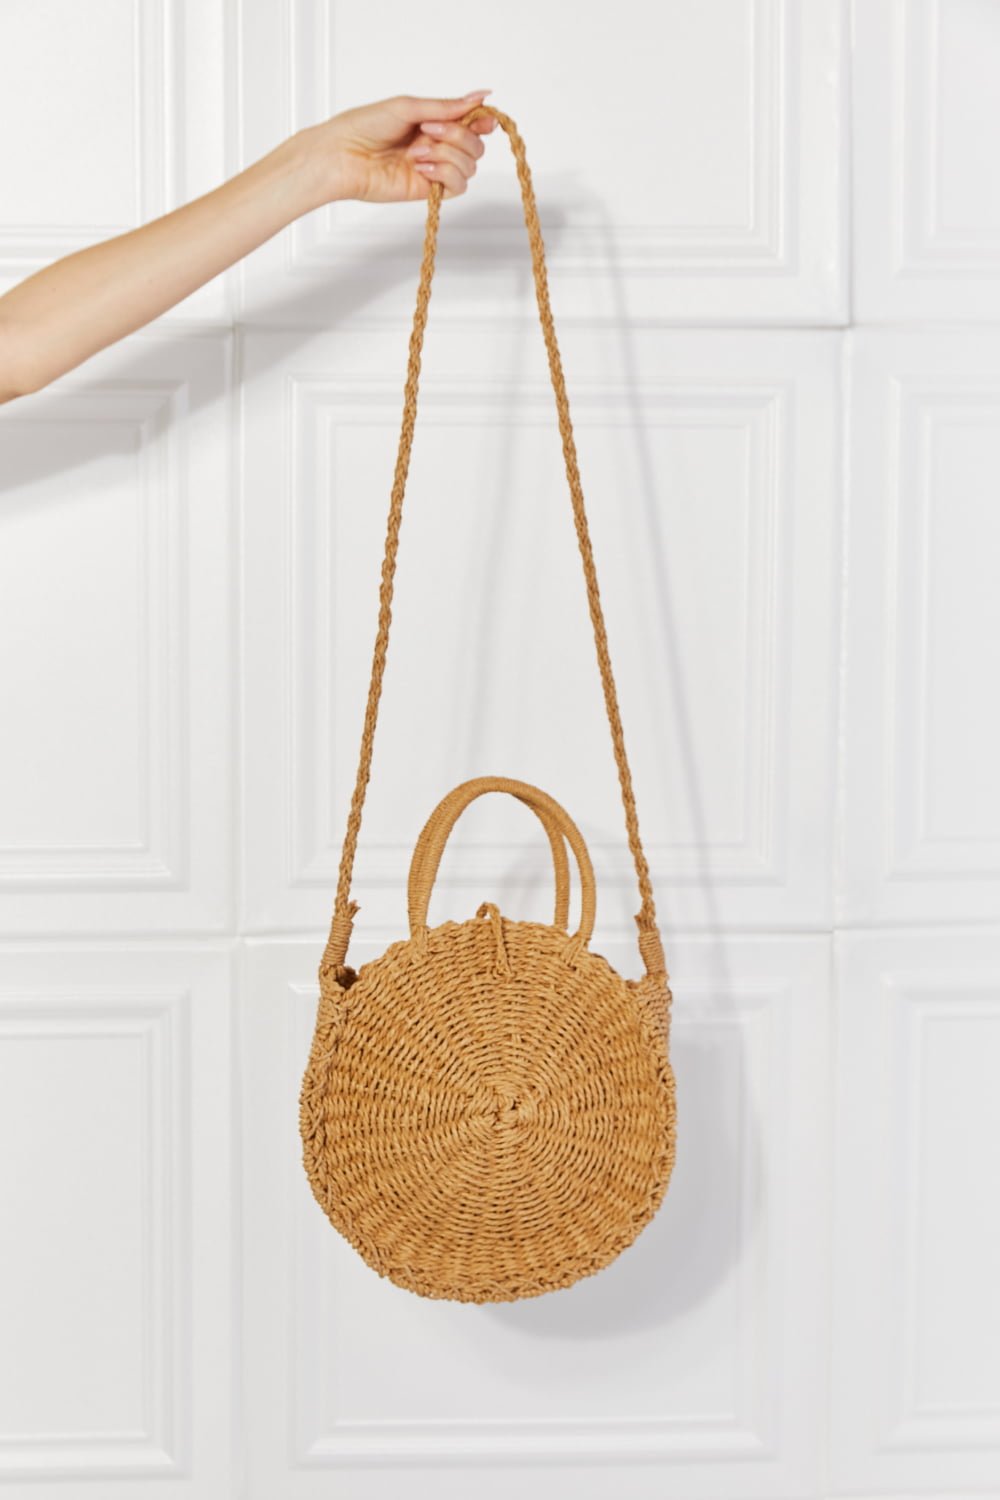 Justin Taylor Feeling Cute Rounded Rattan Handbag in Camel - Fashion Girl Online Store